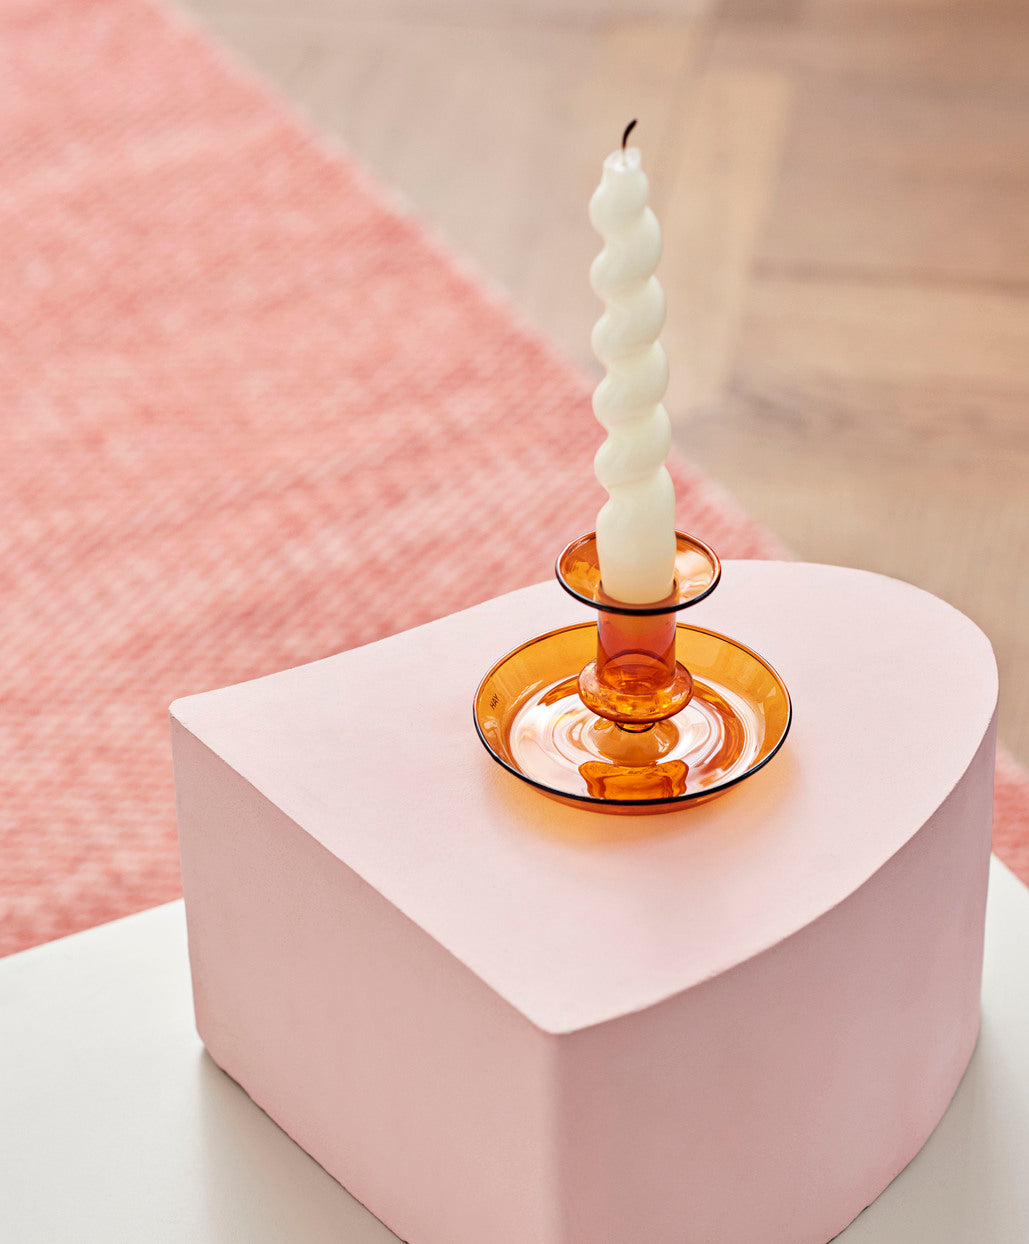 Spiral Candle | Single | Off-White | by HAY - Lifestory